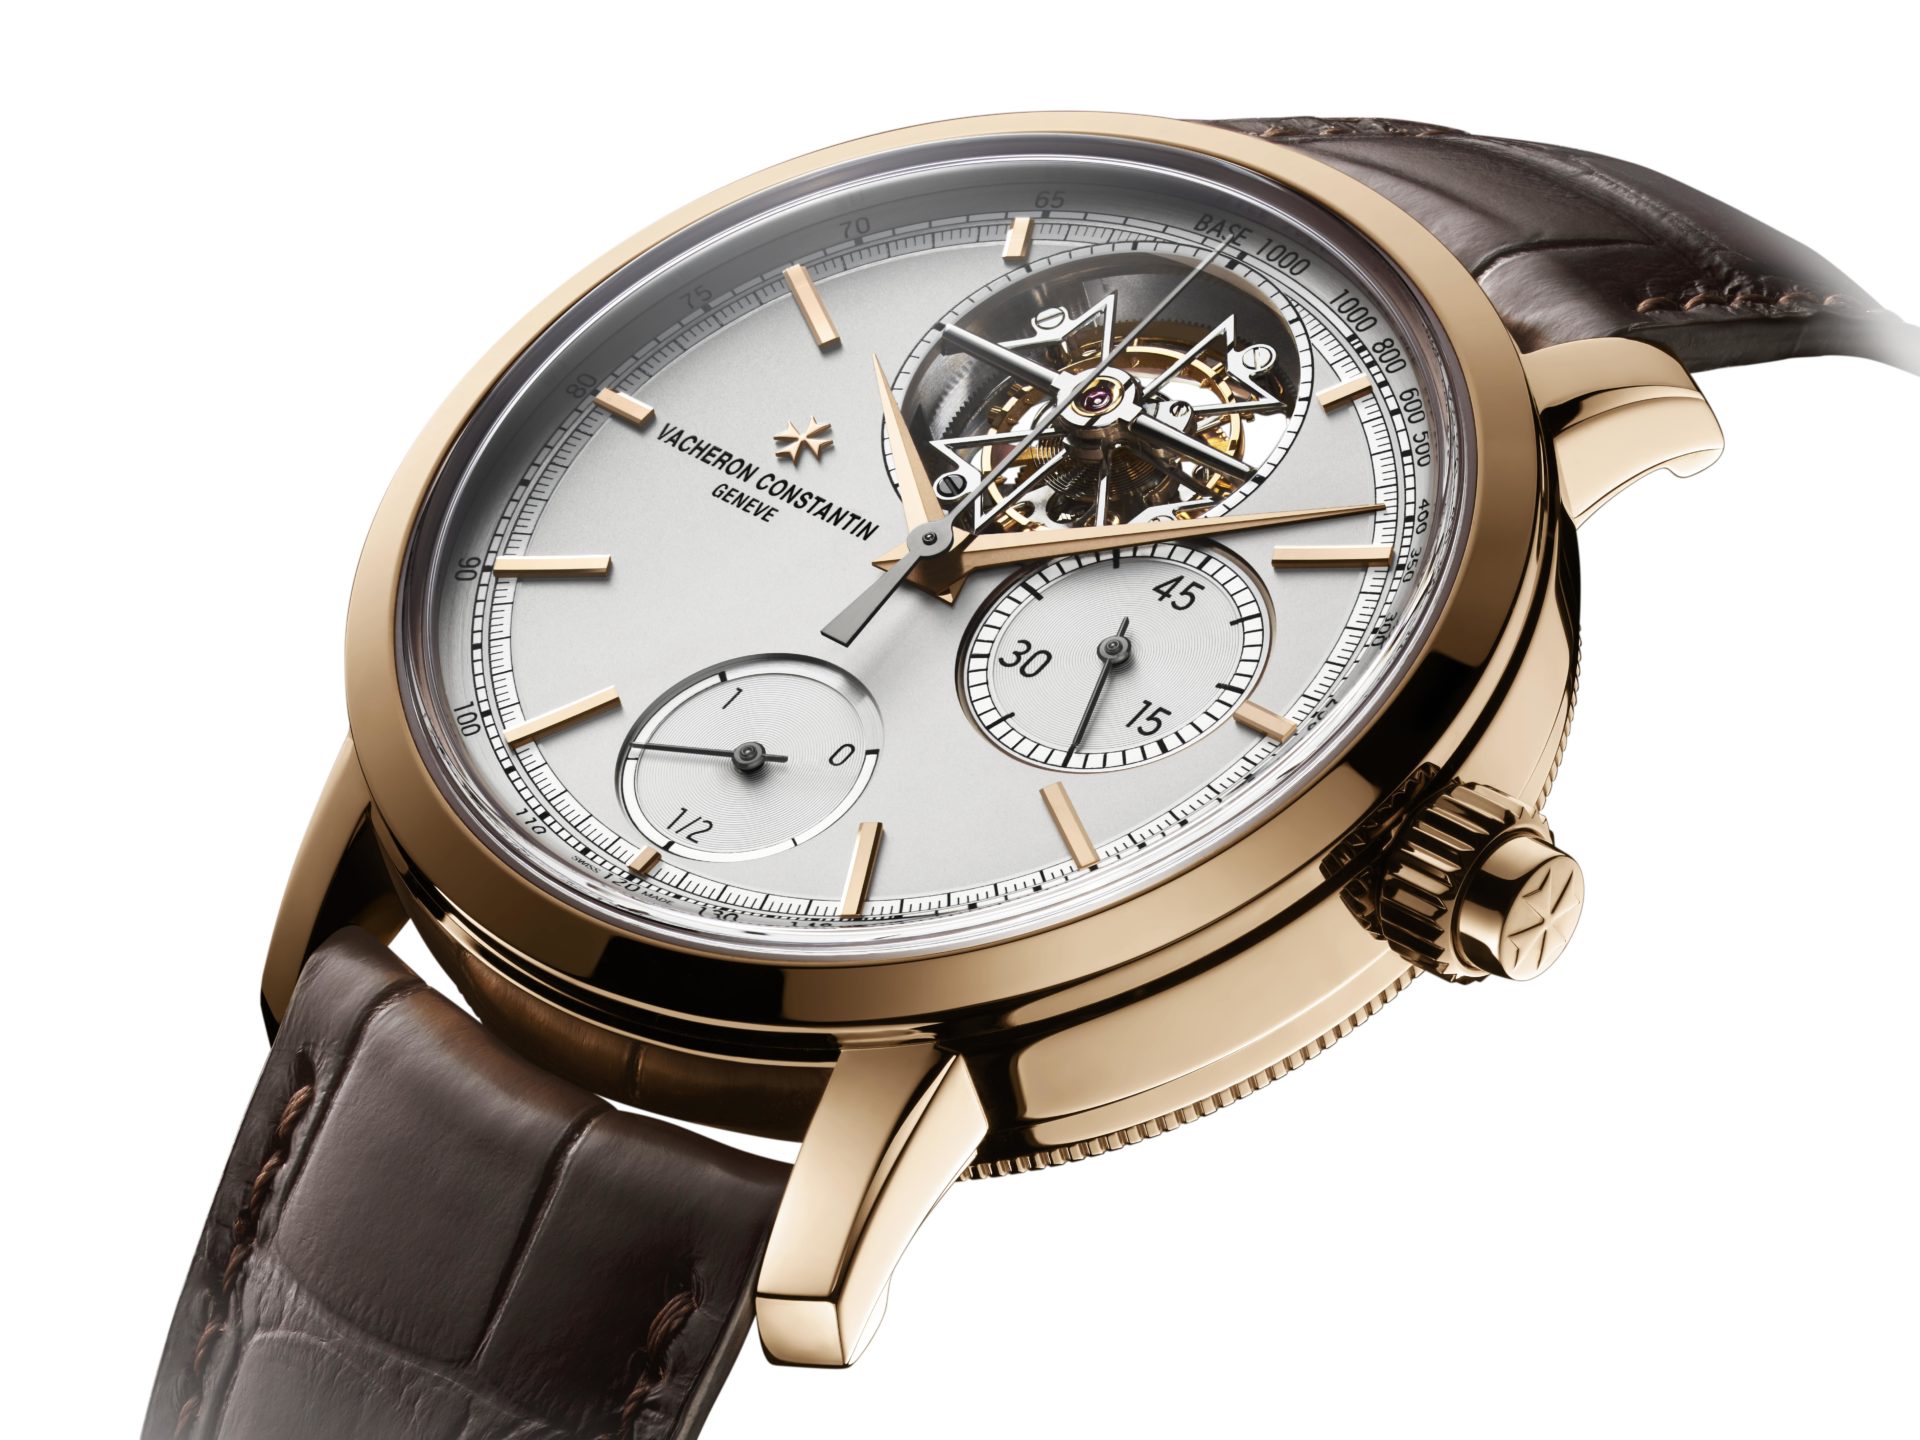 New Vacheron Constantin Novelties for 2020 with Editorial commentary